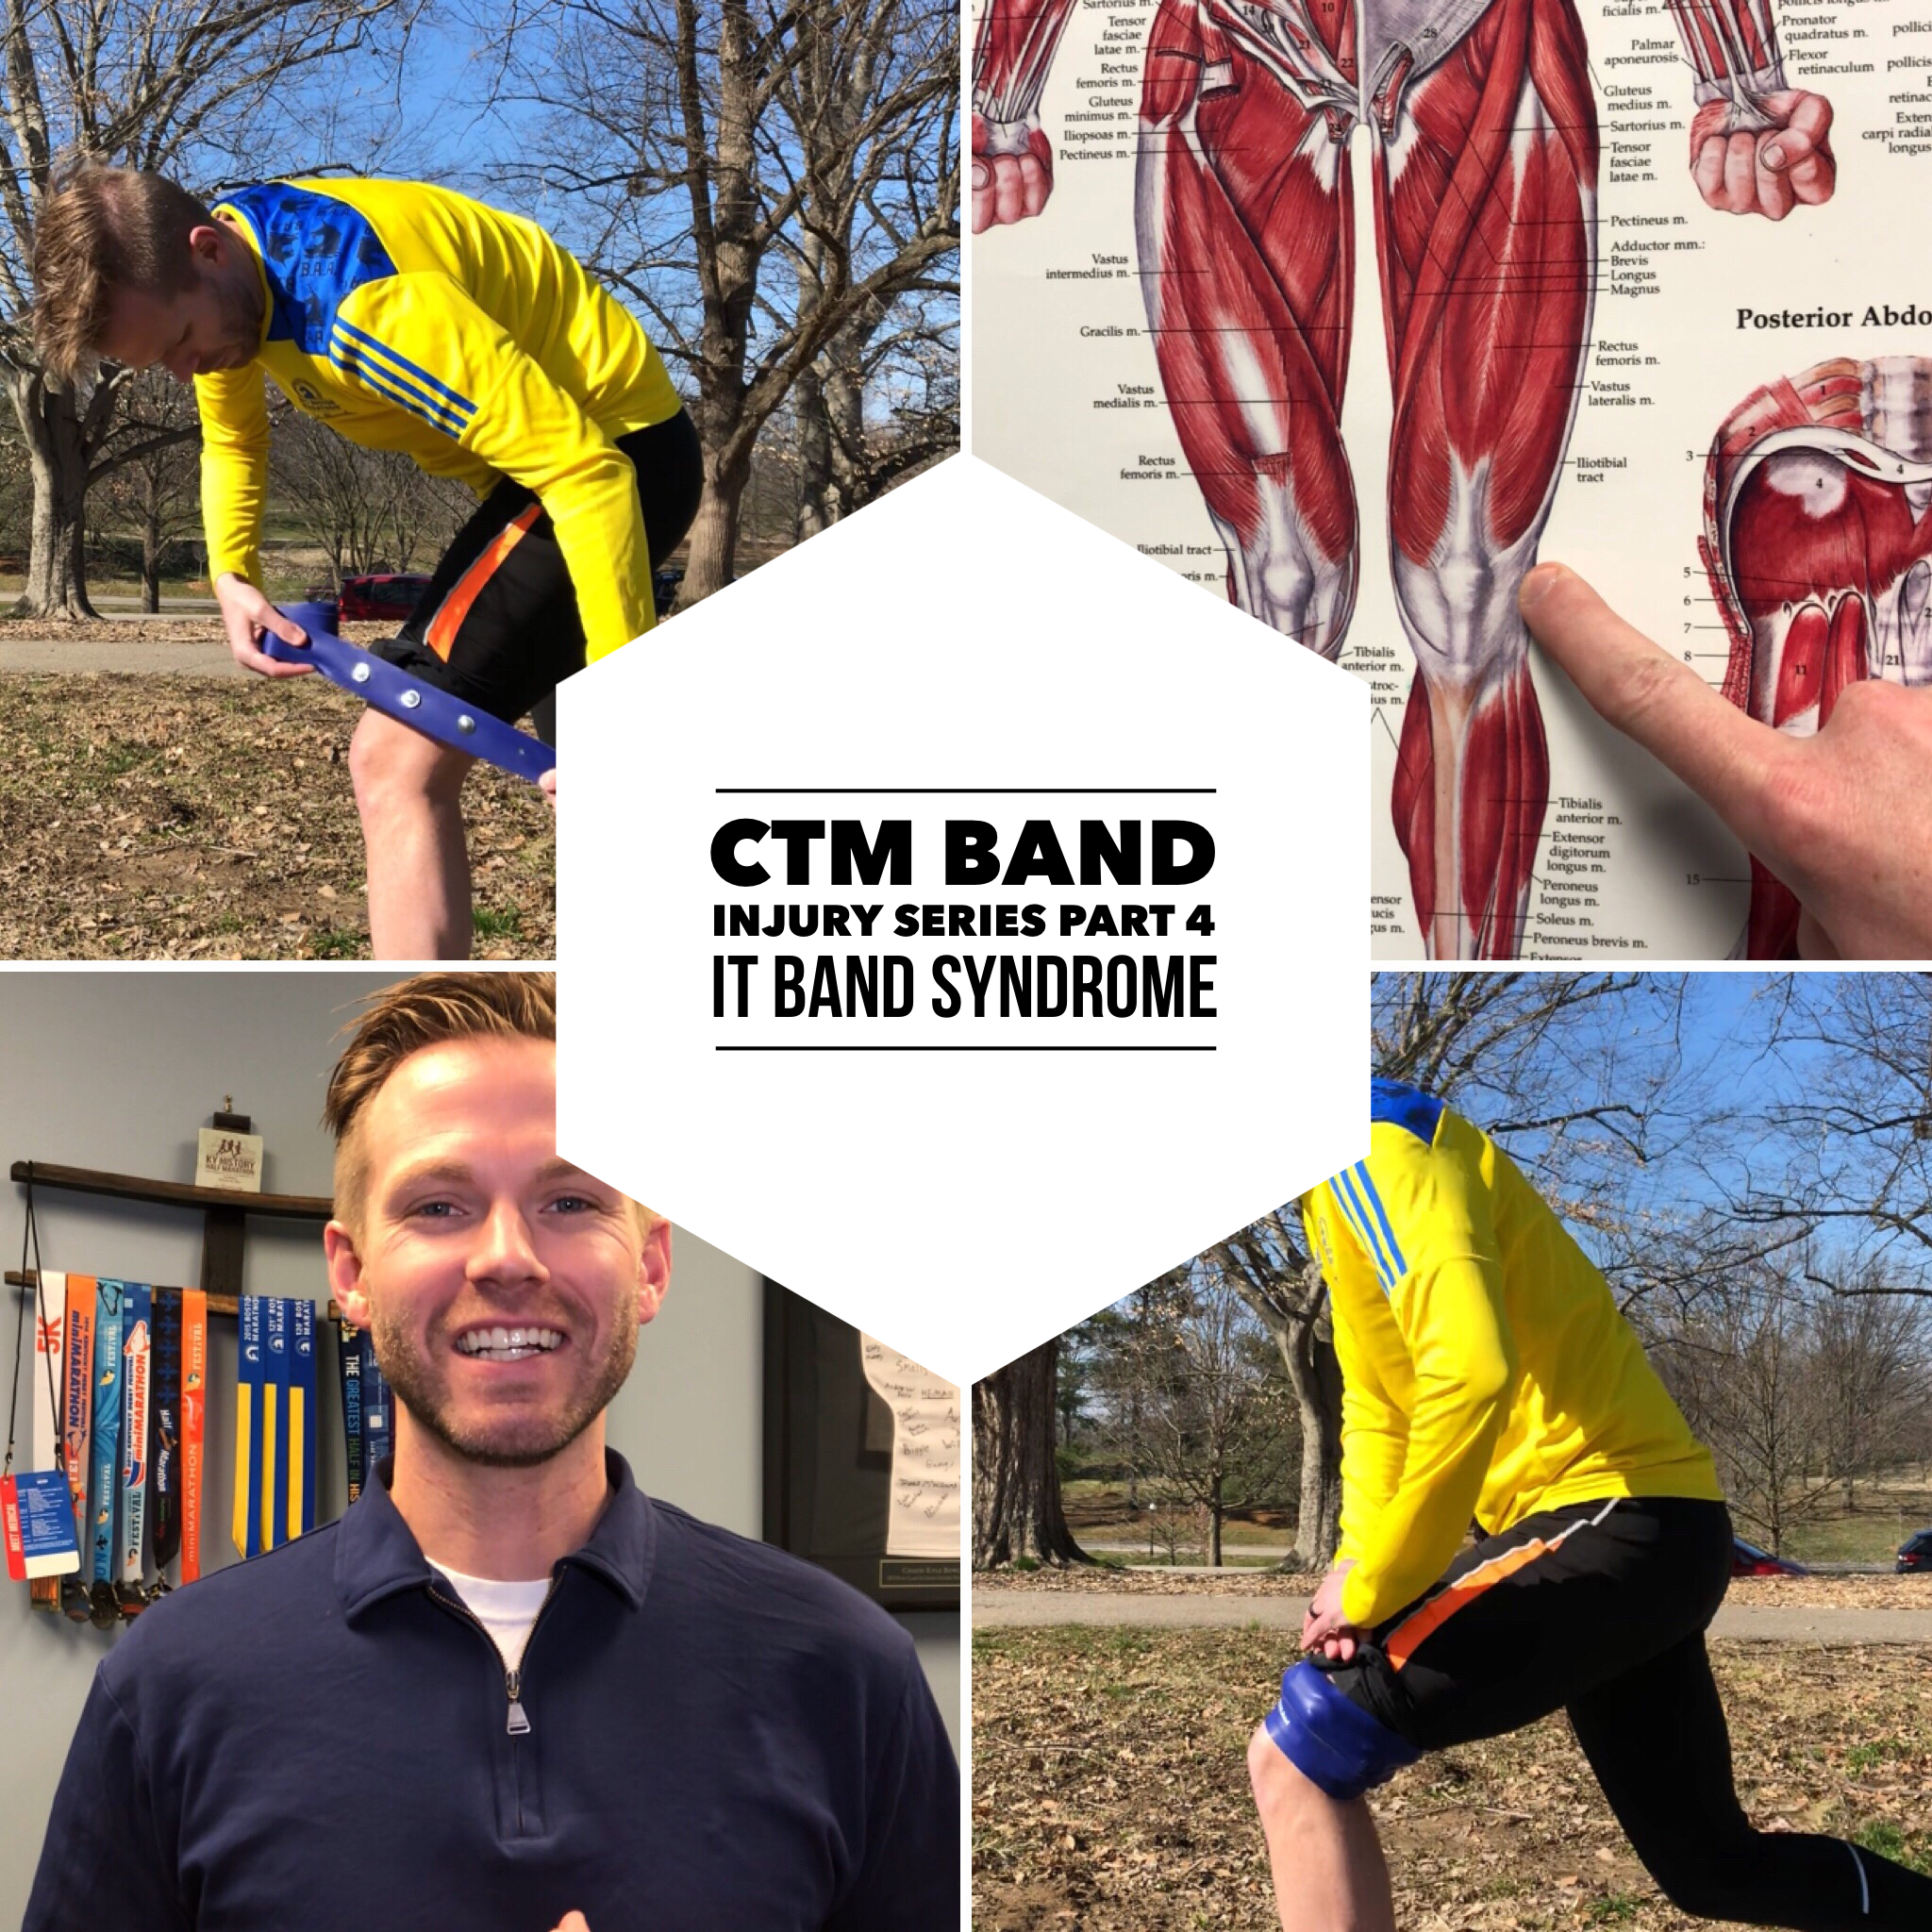 Image. The CTM Band is a soft tissue massage tool, achilles massage tool, hamstring massage tool, etc. It helps with pain on top of kneecap, patellofemoral pain syndrome, sore knees from running. ITB foam roller, illiotibial band foam roller.